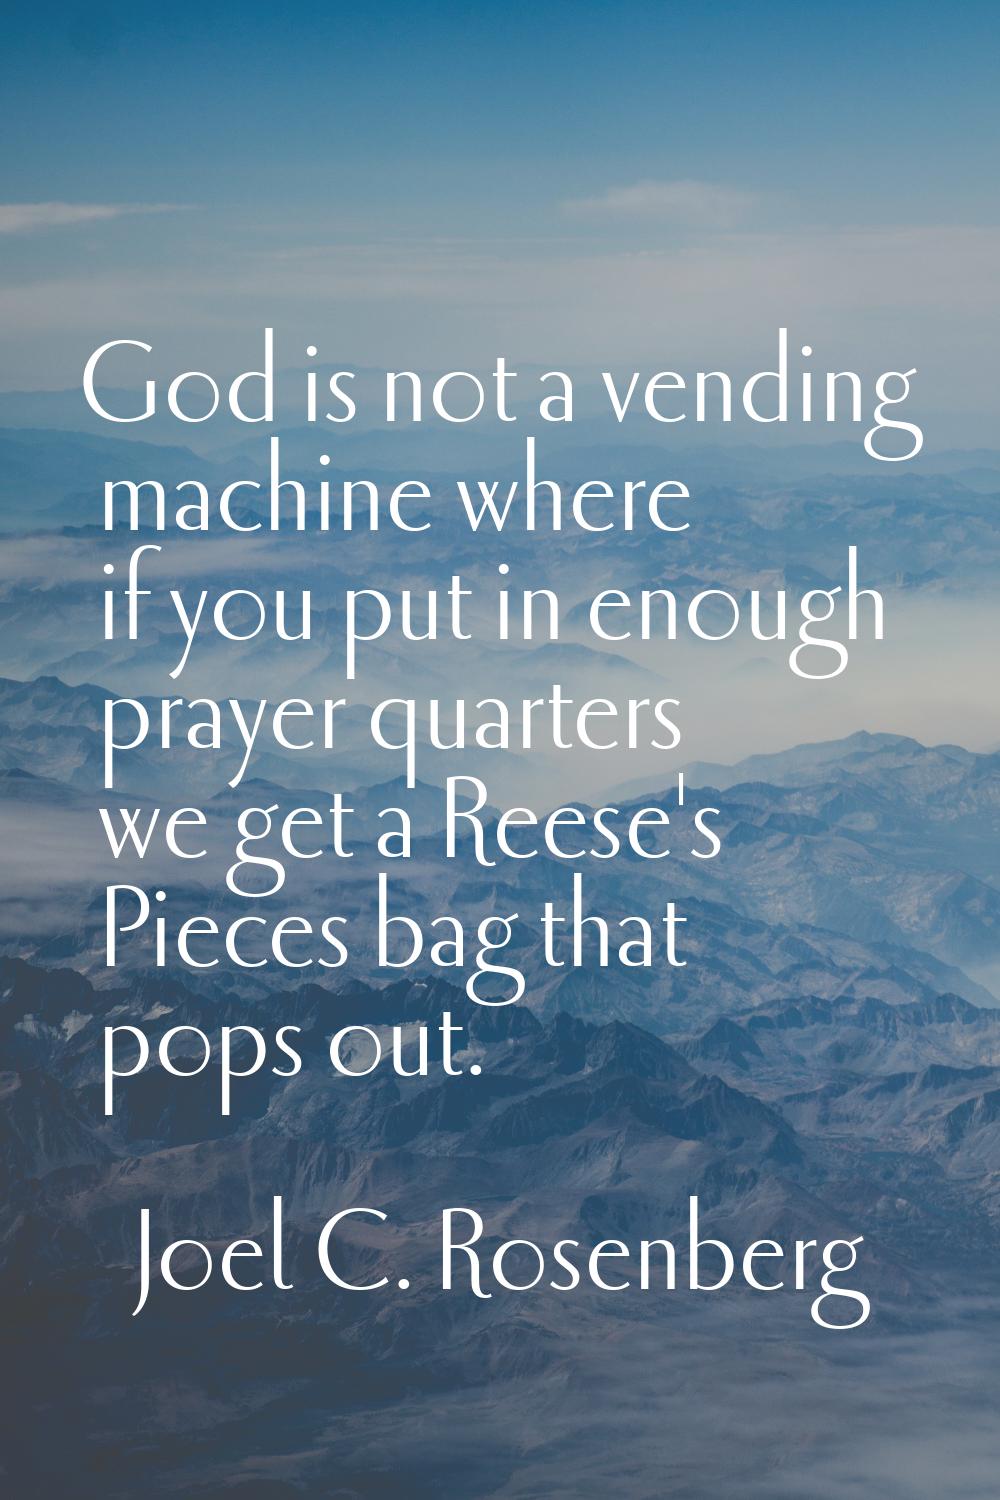 God is not a vending machine where if you put in enough prayer quarters we get a Reese's Pieces bag